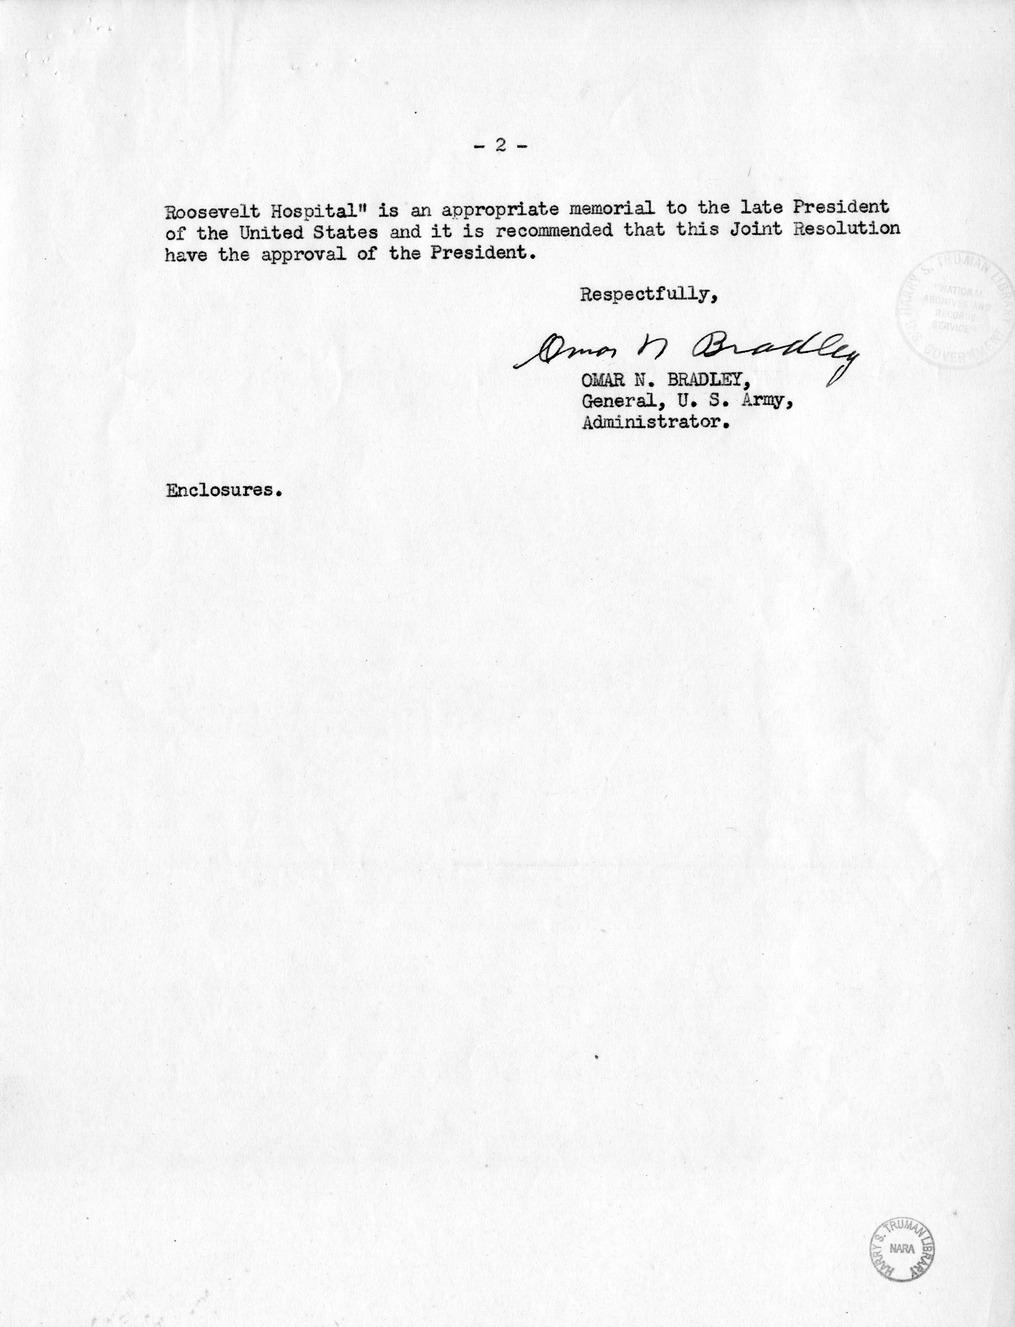 Memorandum from Frederick J. Bailey to M. C. Latta, S.J. Res. 78, To Provide for Designation of the Veterans' Administration Hospital at Crugers-on-Hudson, Near Peeksill, New York, as 'Franklin Delano Roosevelt Hospital', with Attachments